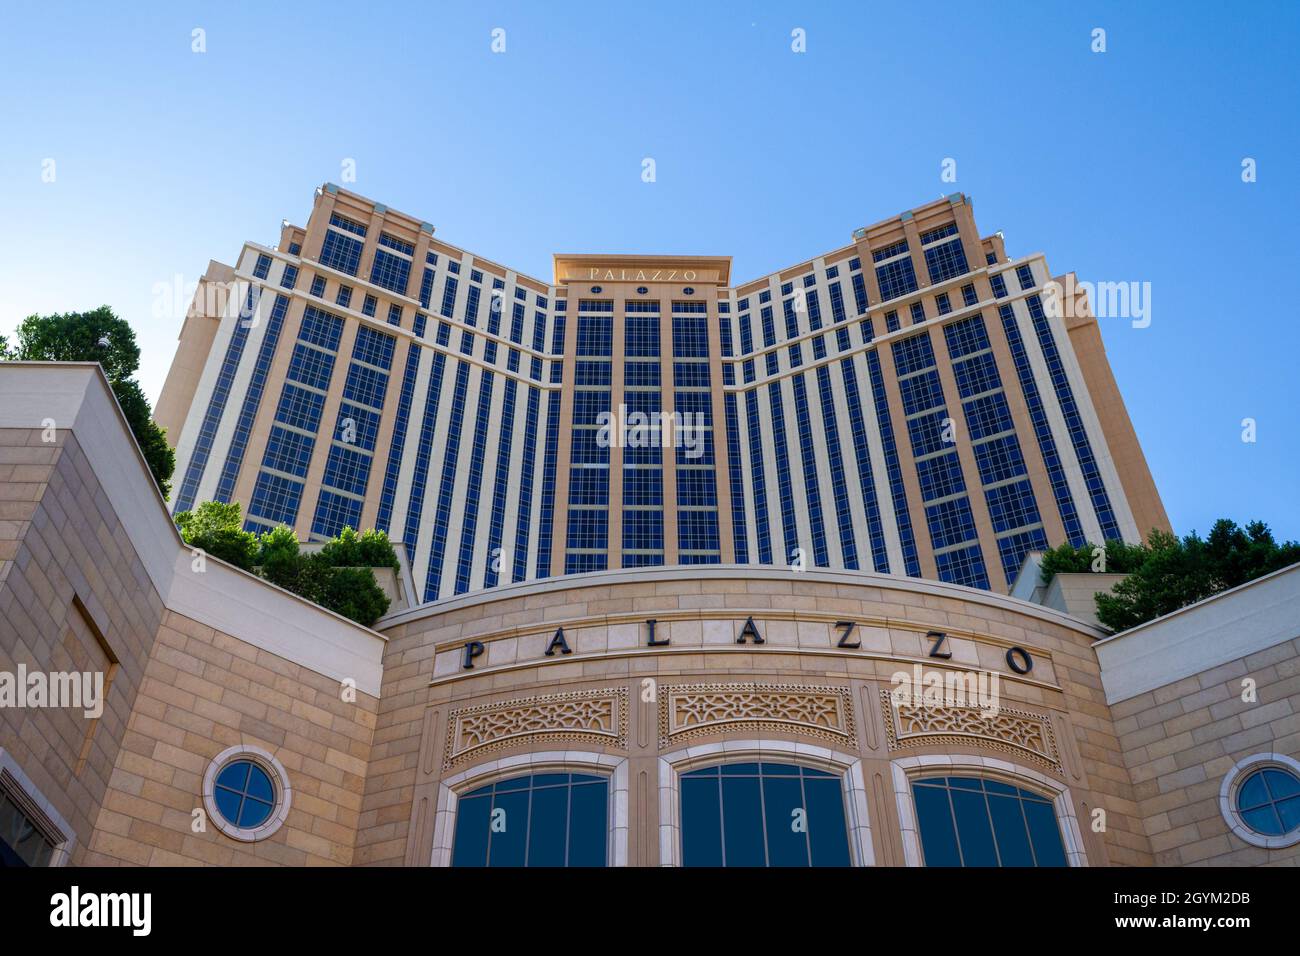 Las Vegas, NV, USA – June 8, 2021: Exterior view of the Palazzo Hotel and Casino located in Las Vegas, Nevada. Stock Photo